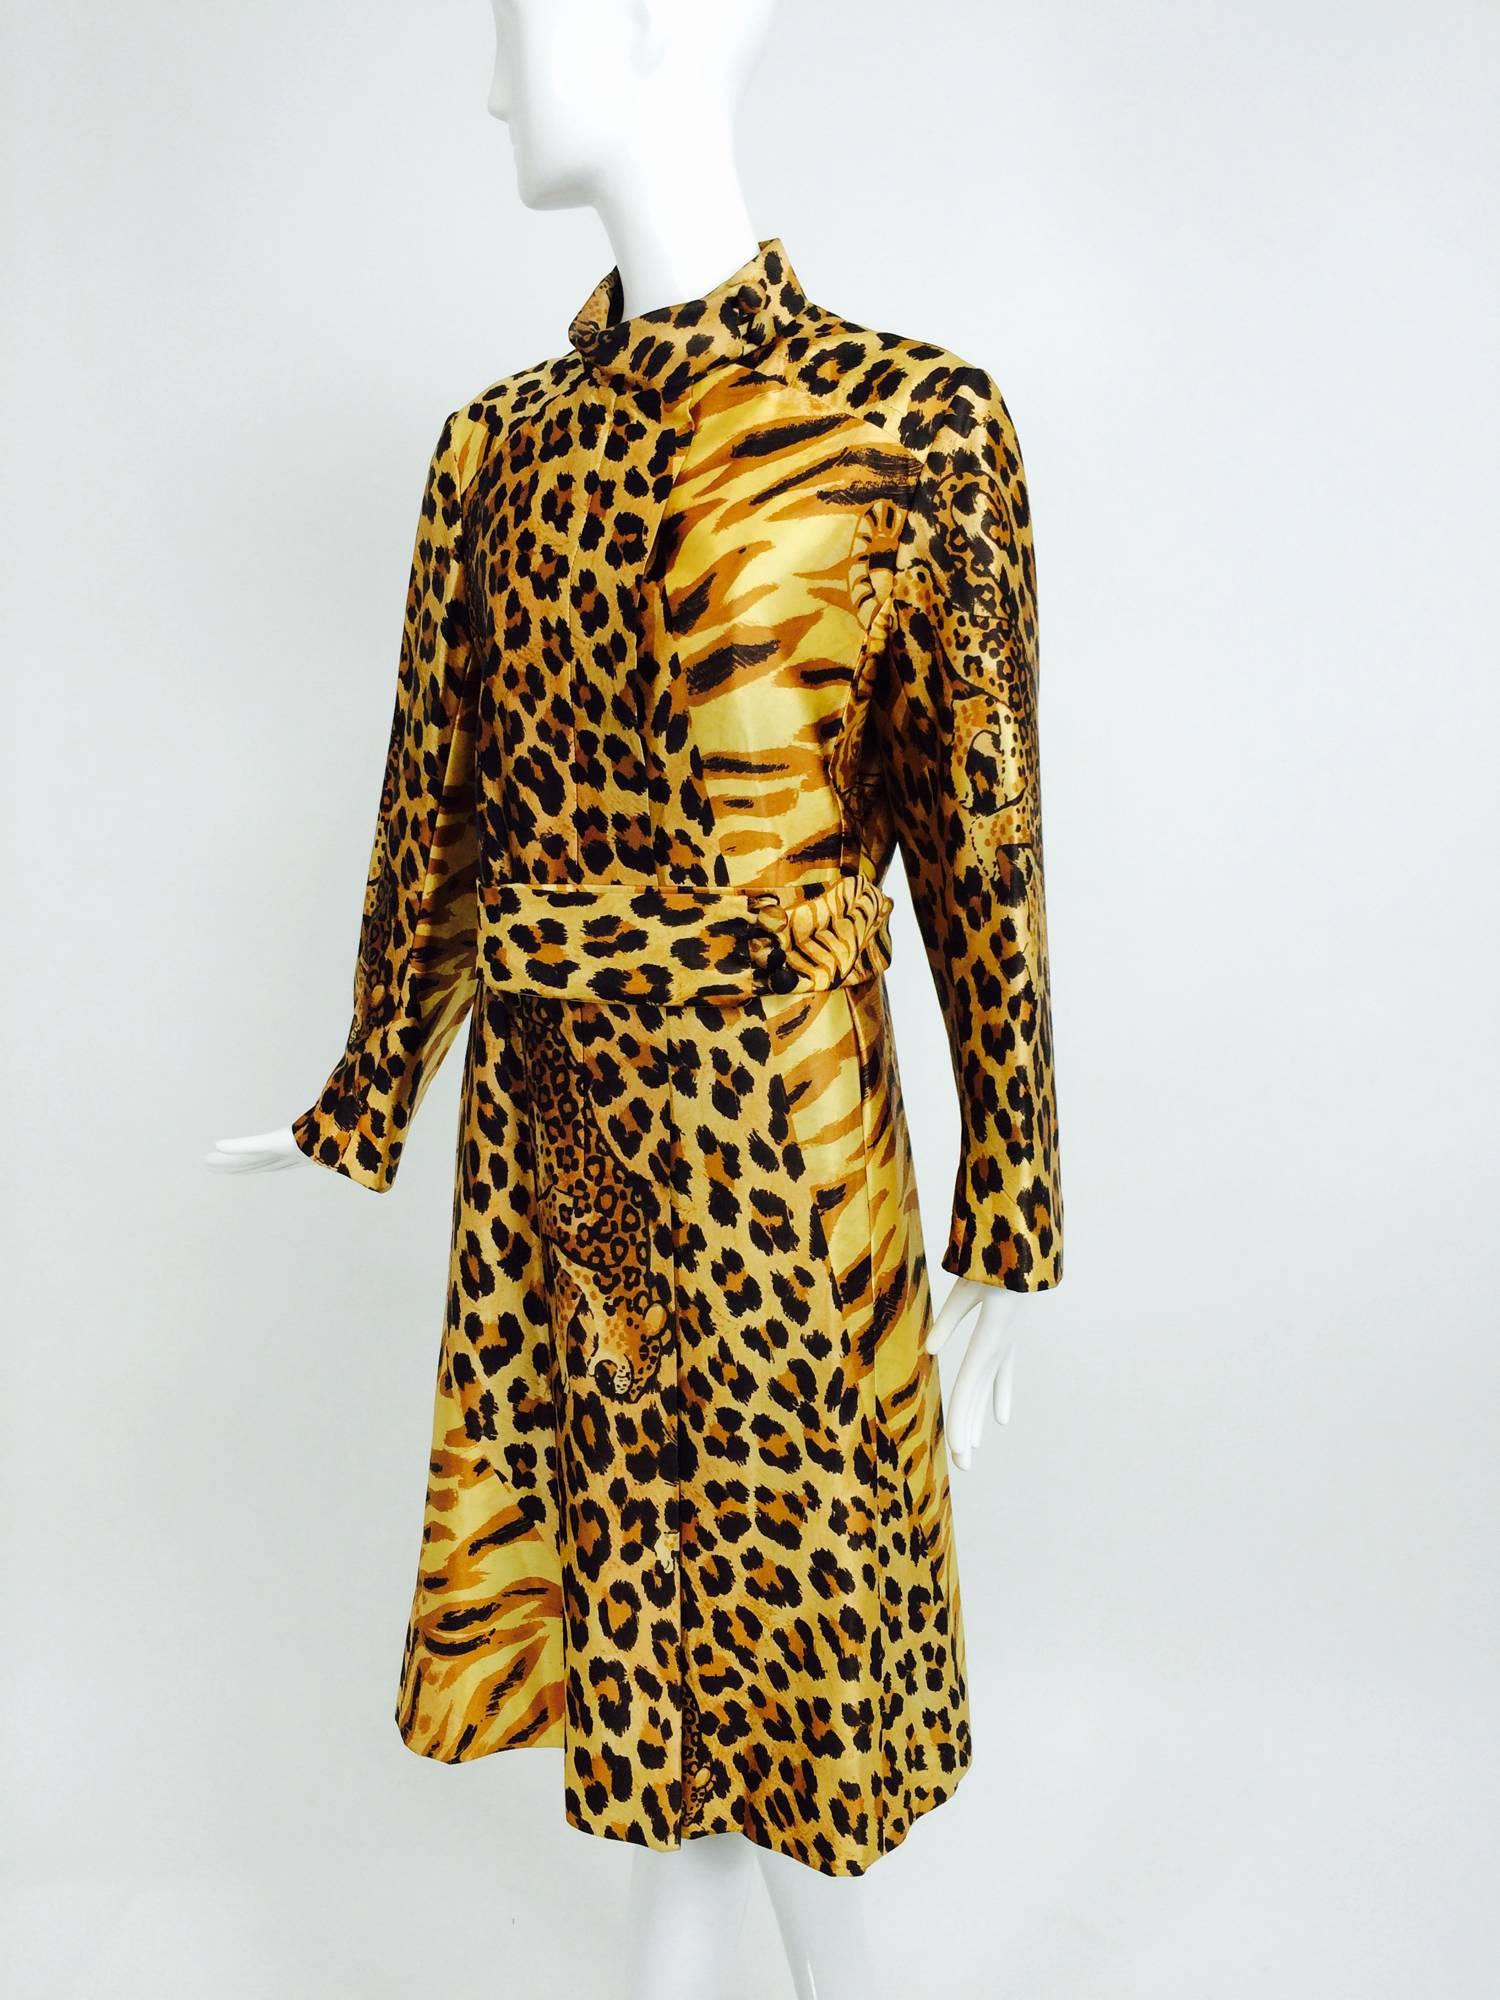 Fantastic leopard print, with prowling leopards! Rain coat from the 1970s labeled Main Street has a stand up collar with covered button closure at the neck...Single breasted placket front coat with on seam front pockets and self belt...Shoulder yoke